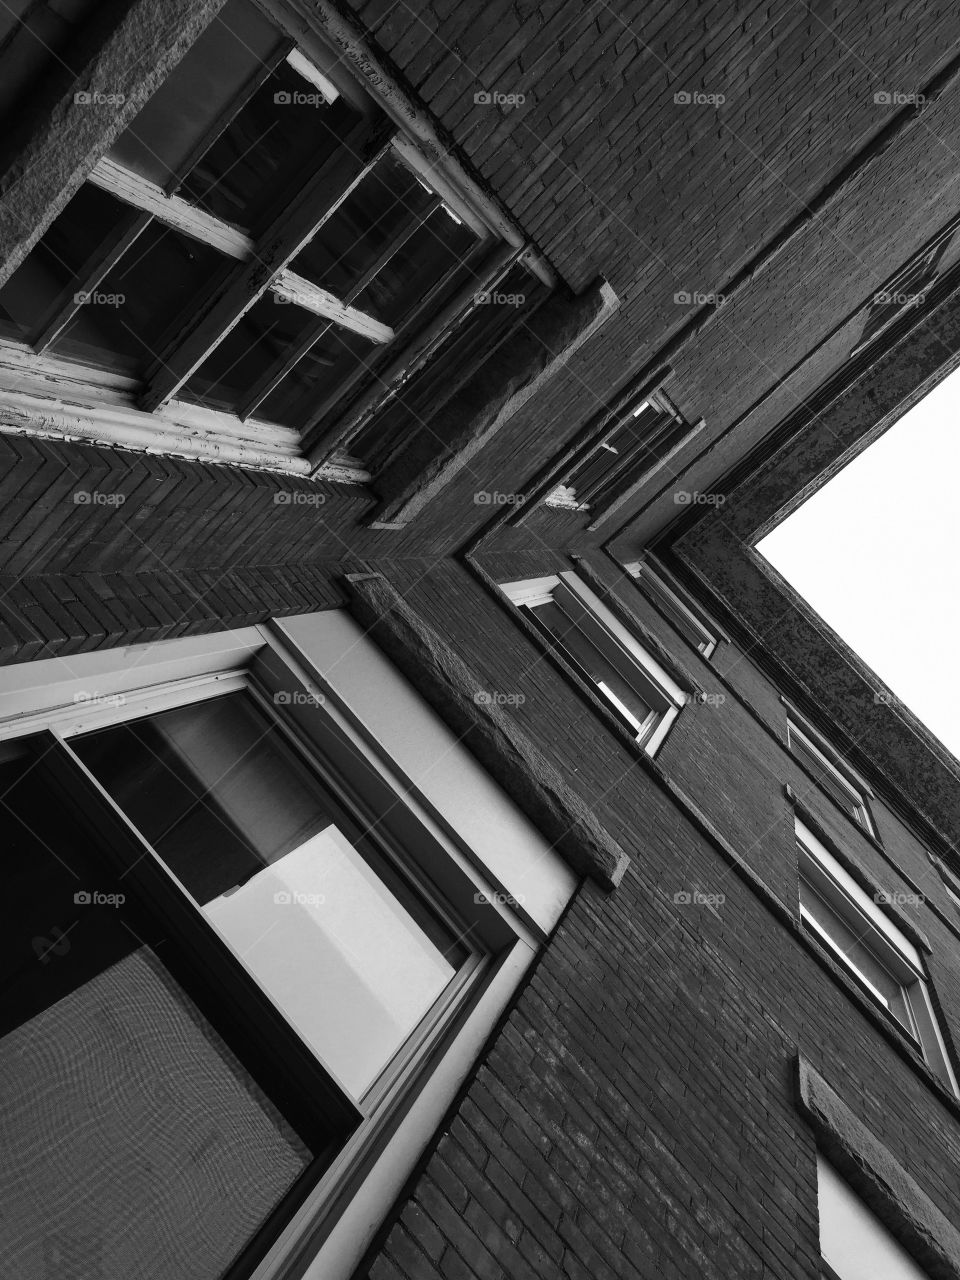 School building . Corner of a school building looking up In black and white